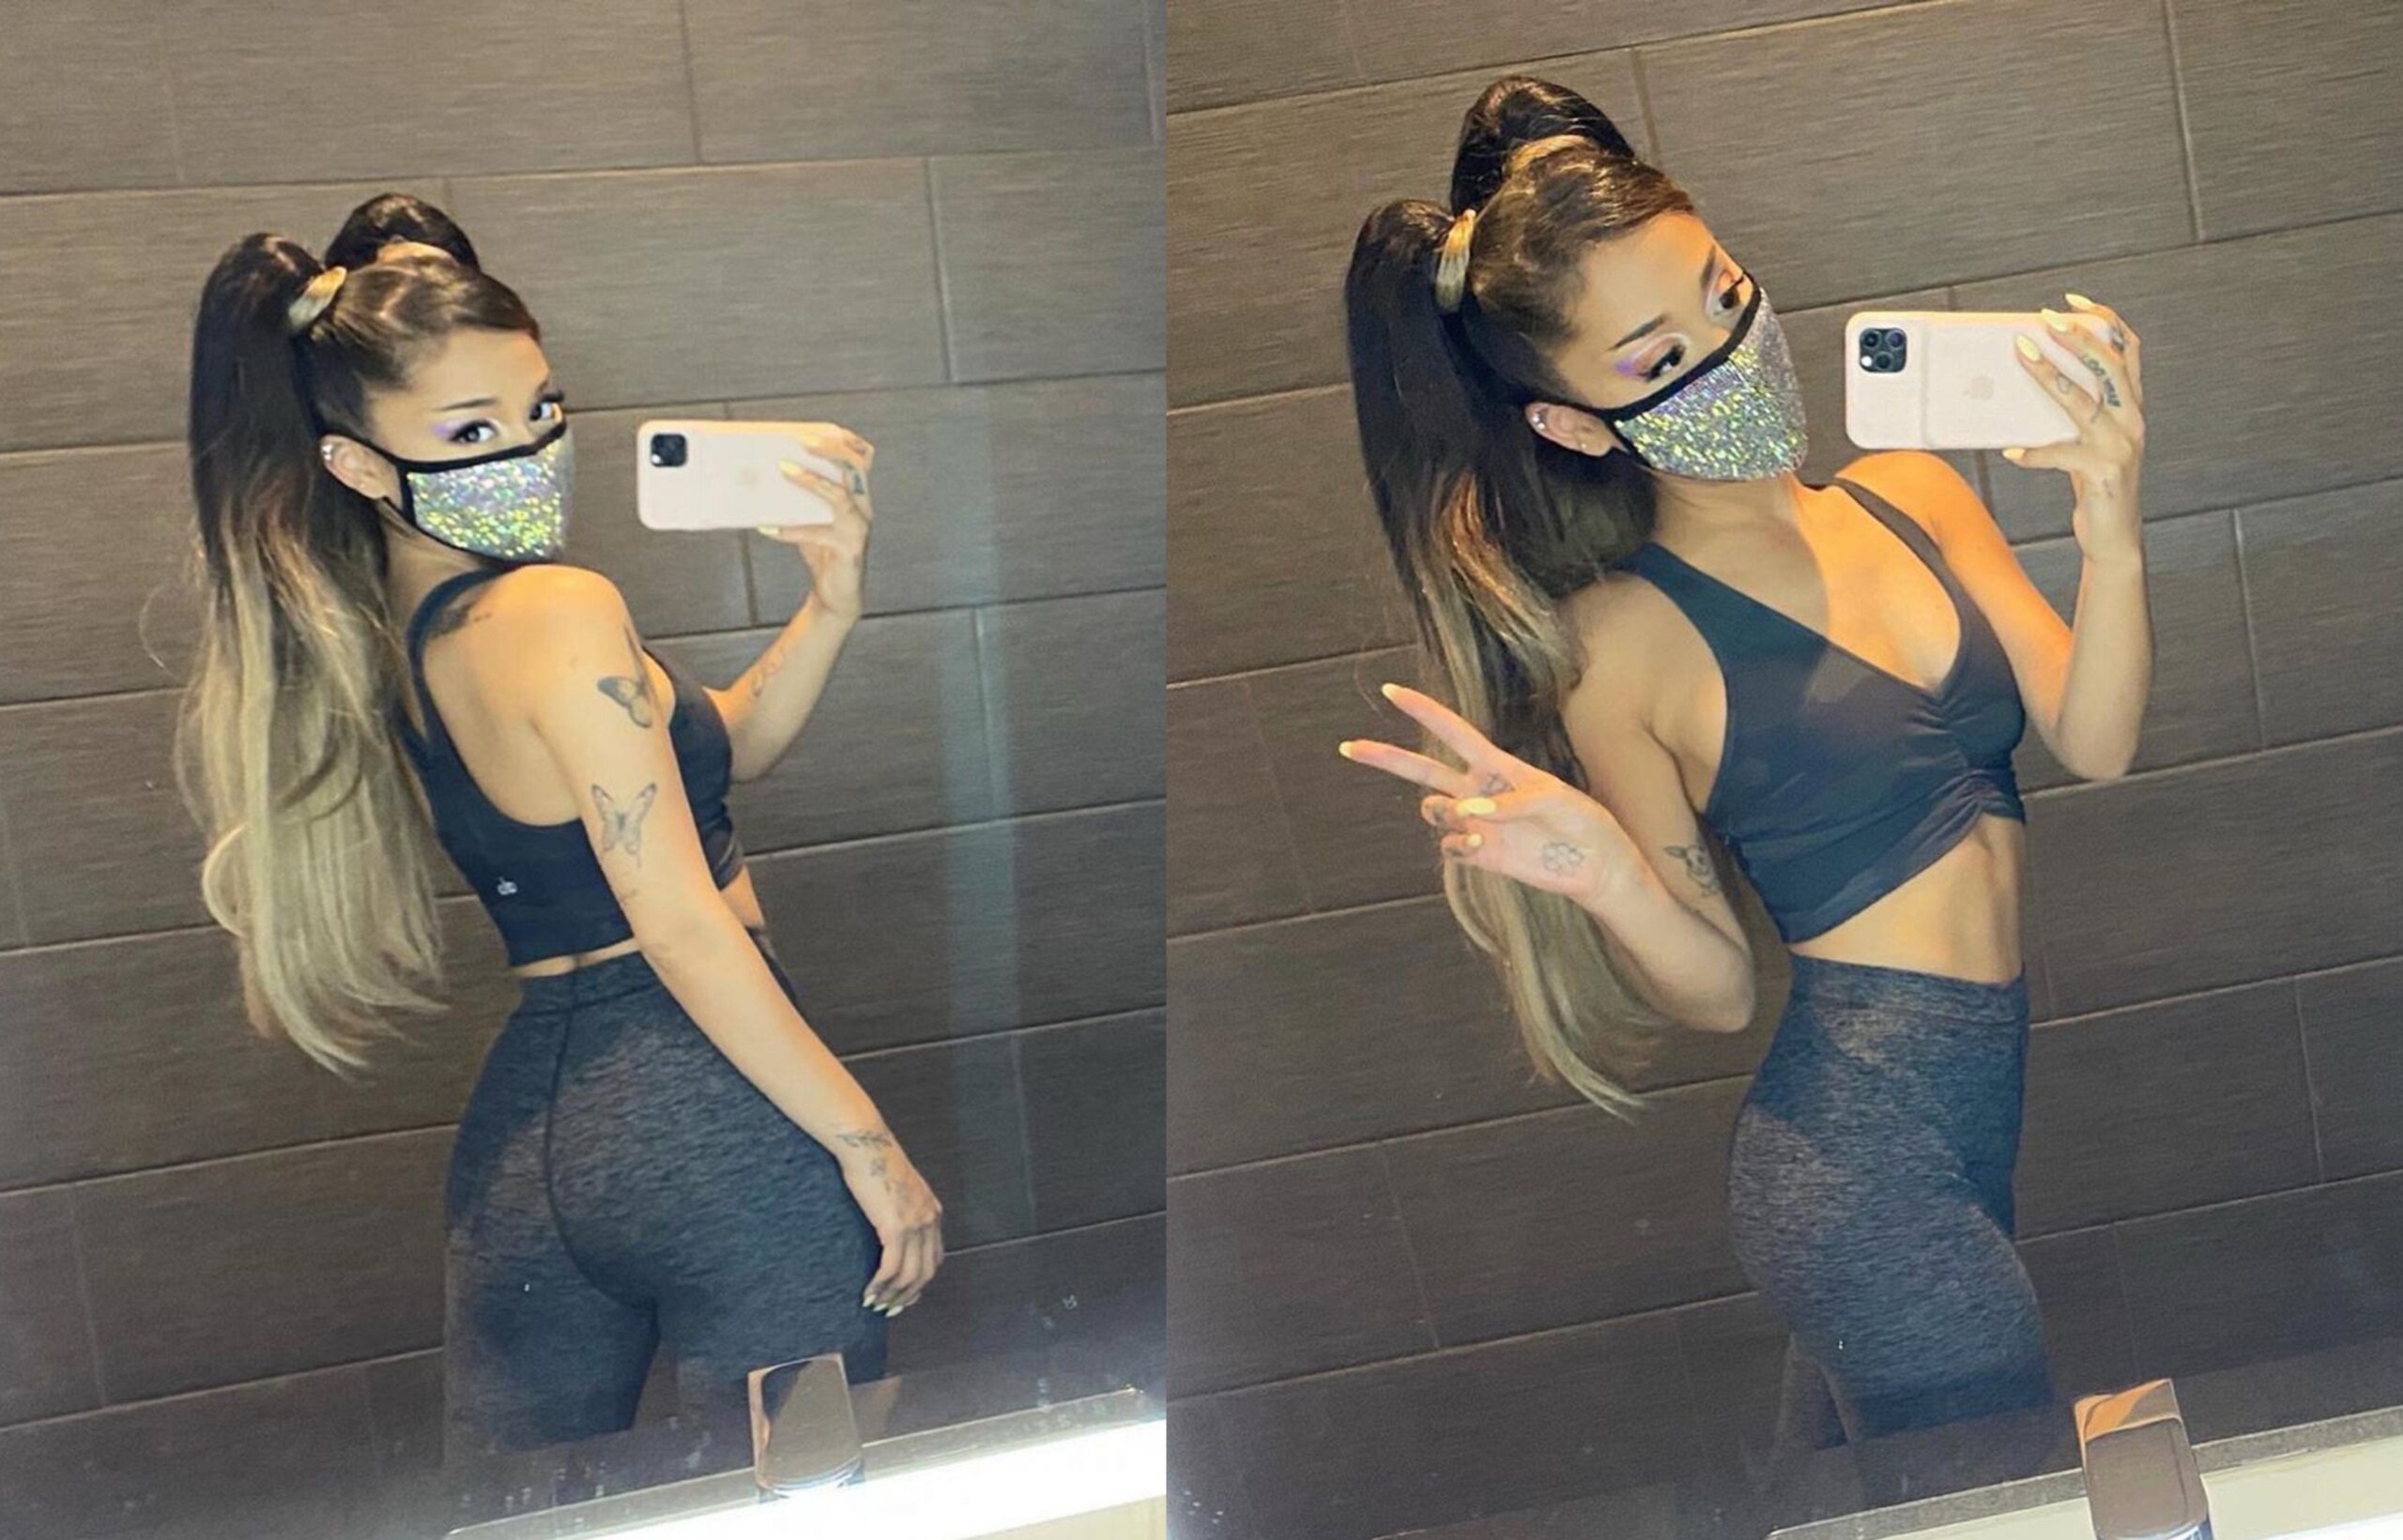 Ariana Grande needs to pull her leggings down and show